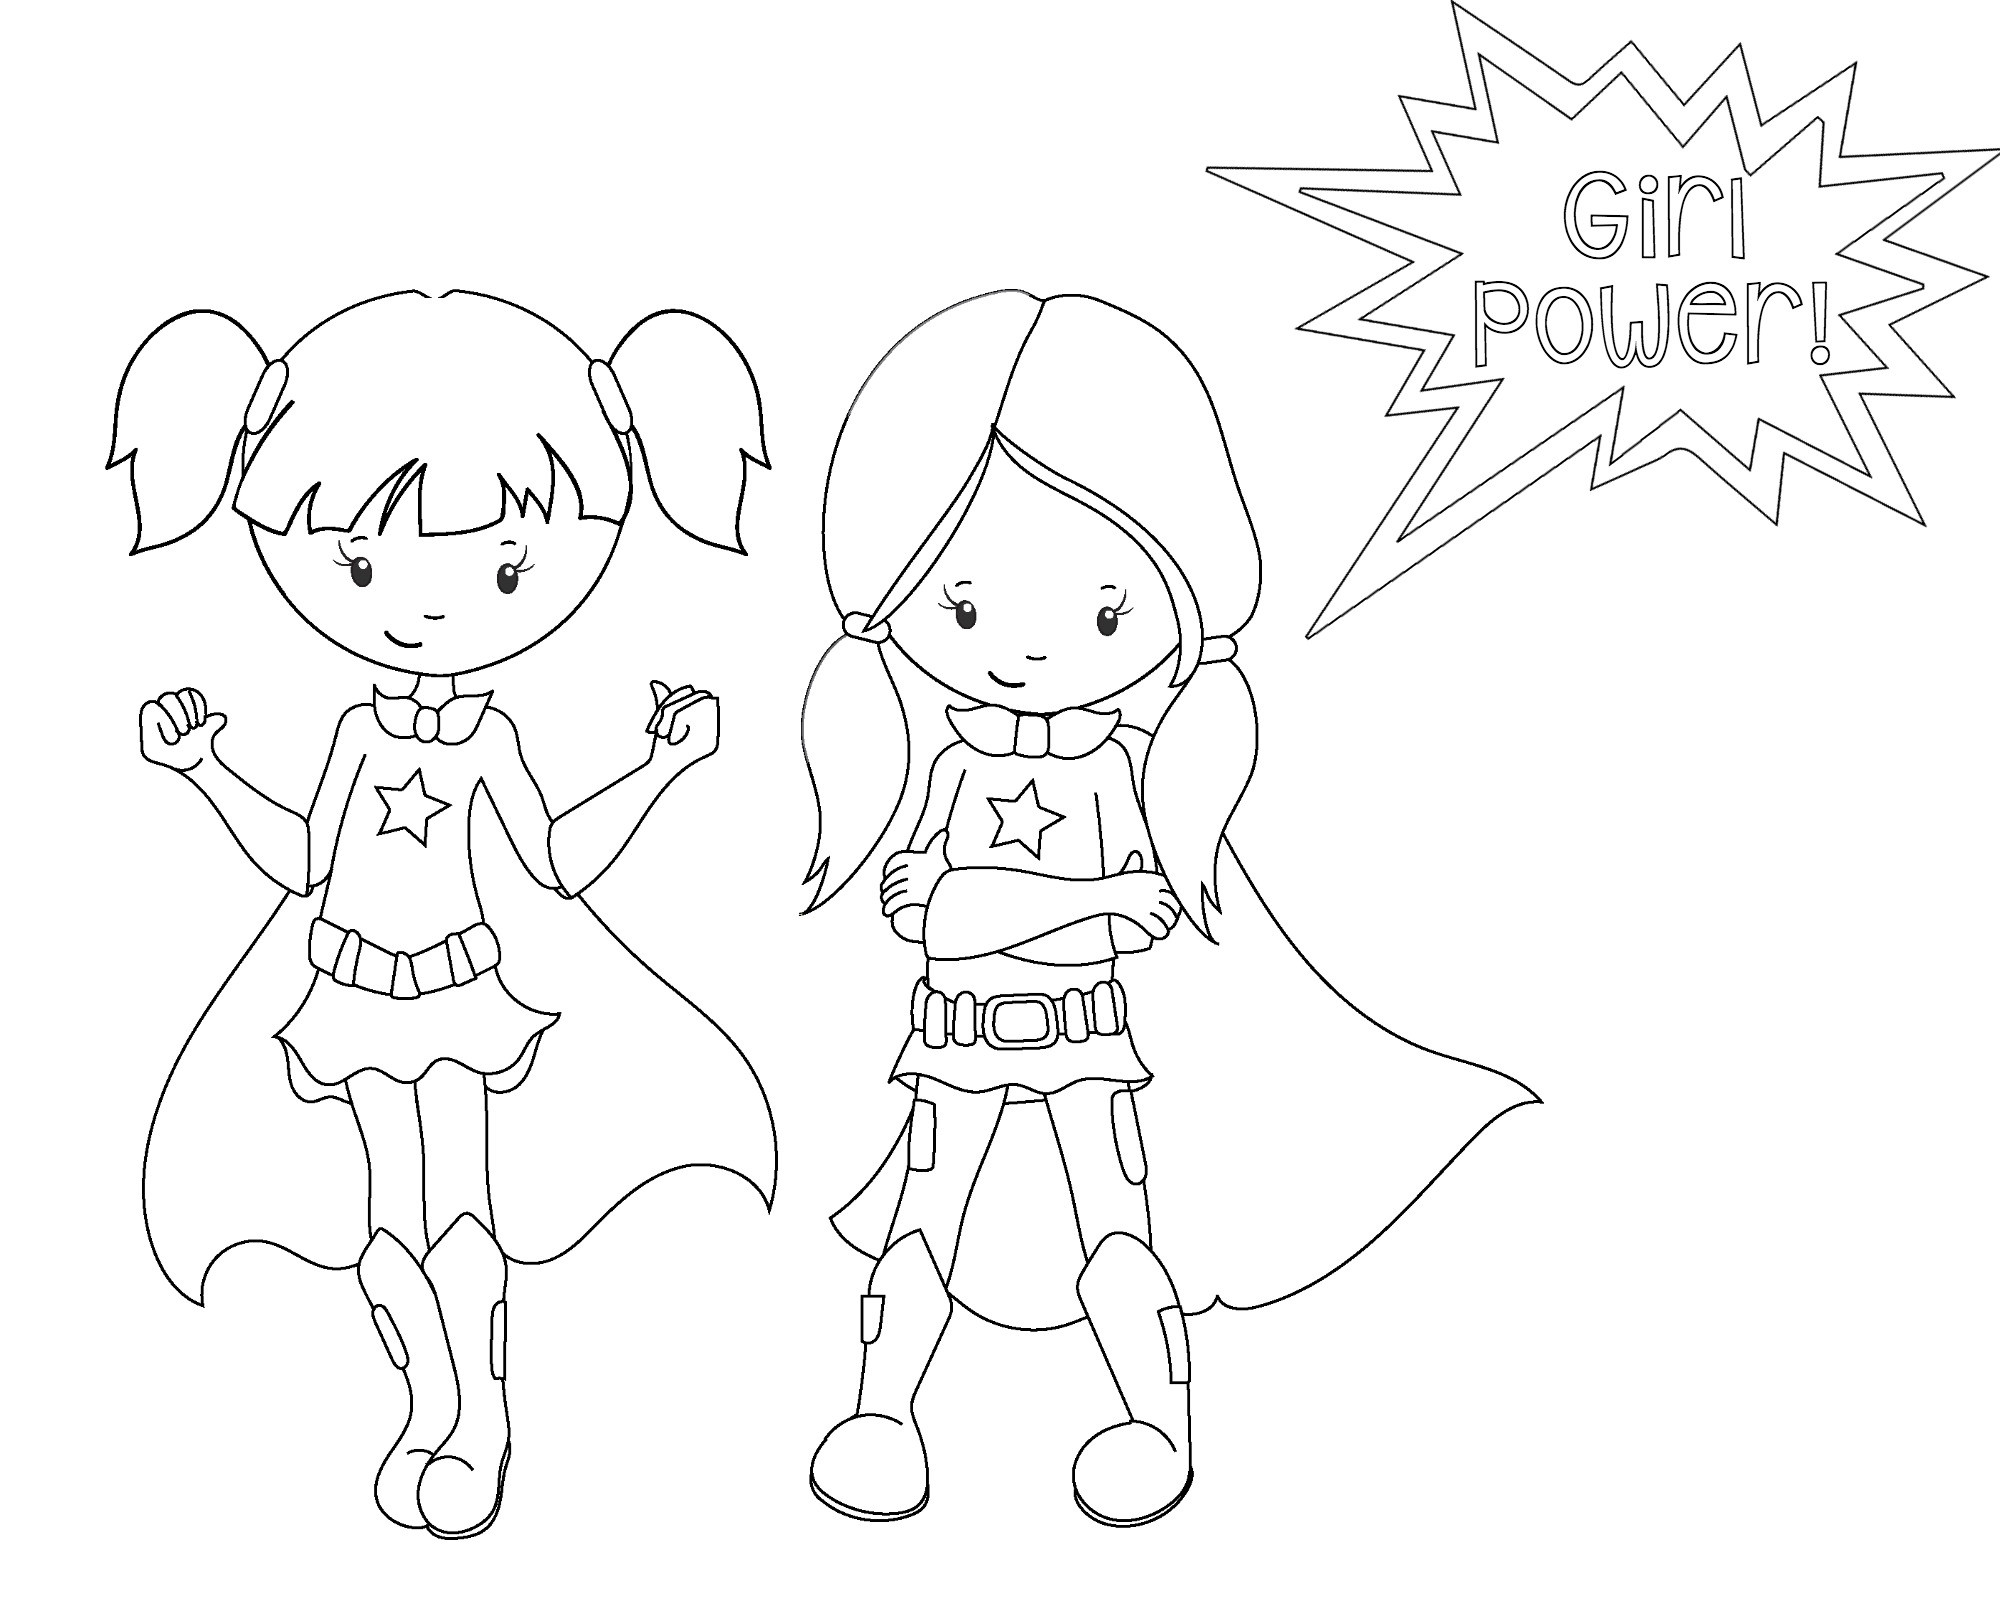 Superhero Boys Coloring Pages
 Superhero Coloring Pages Crazy Little Projects